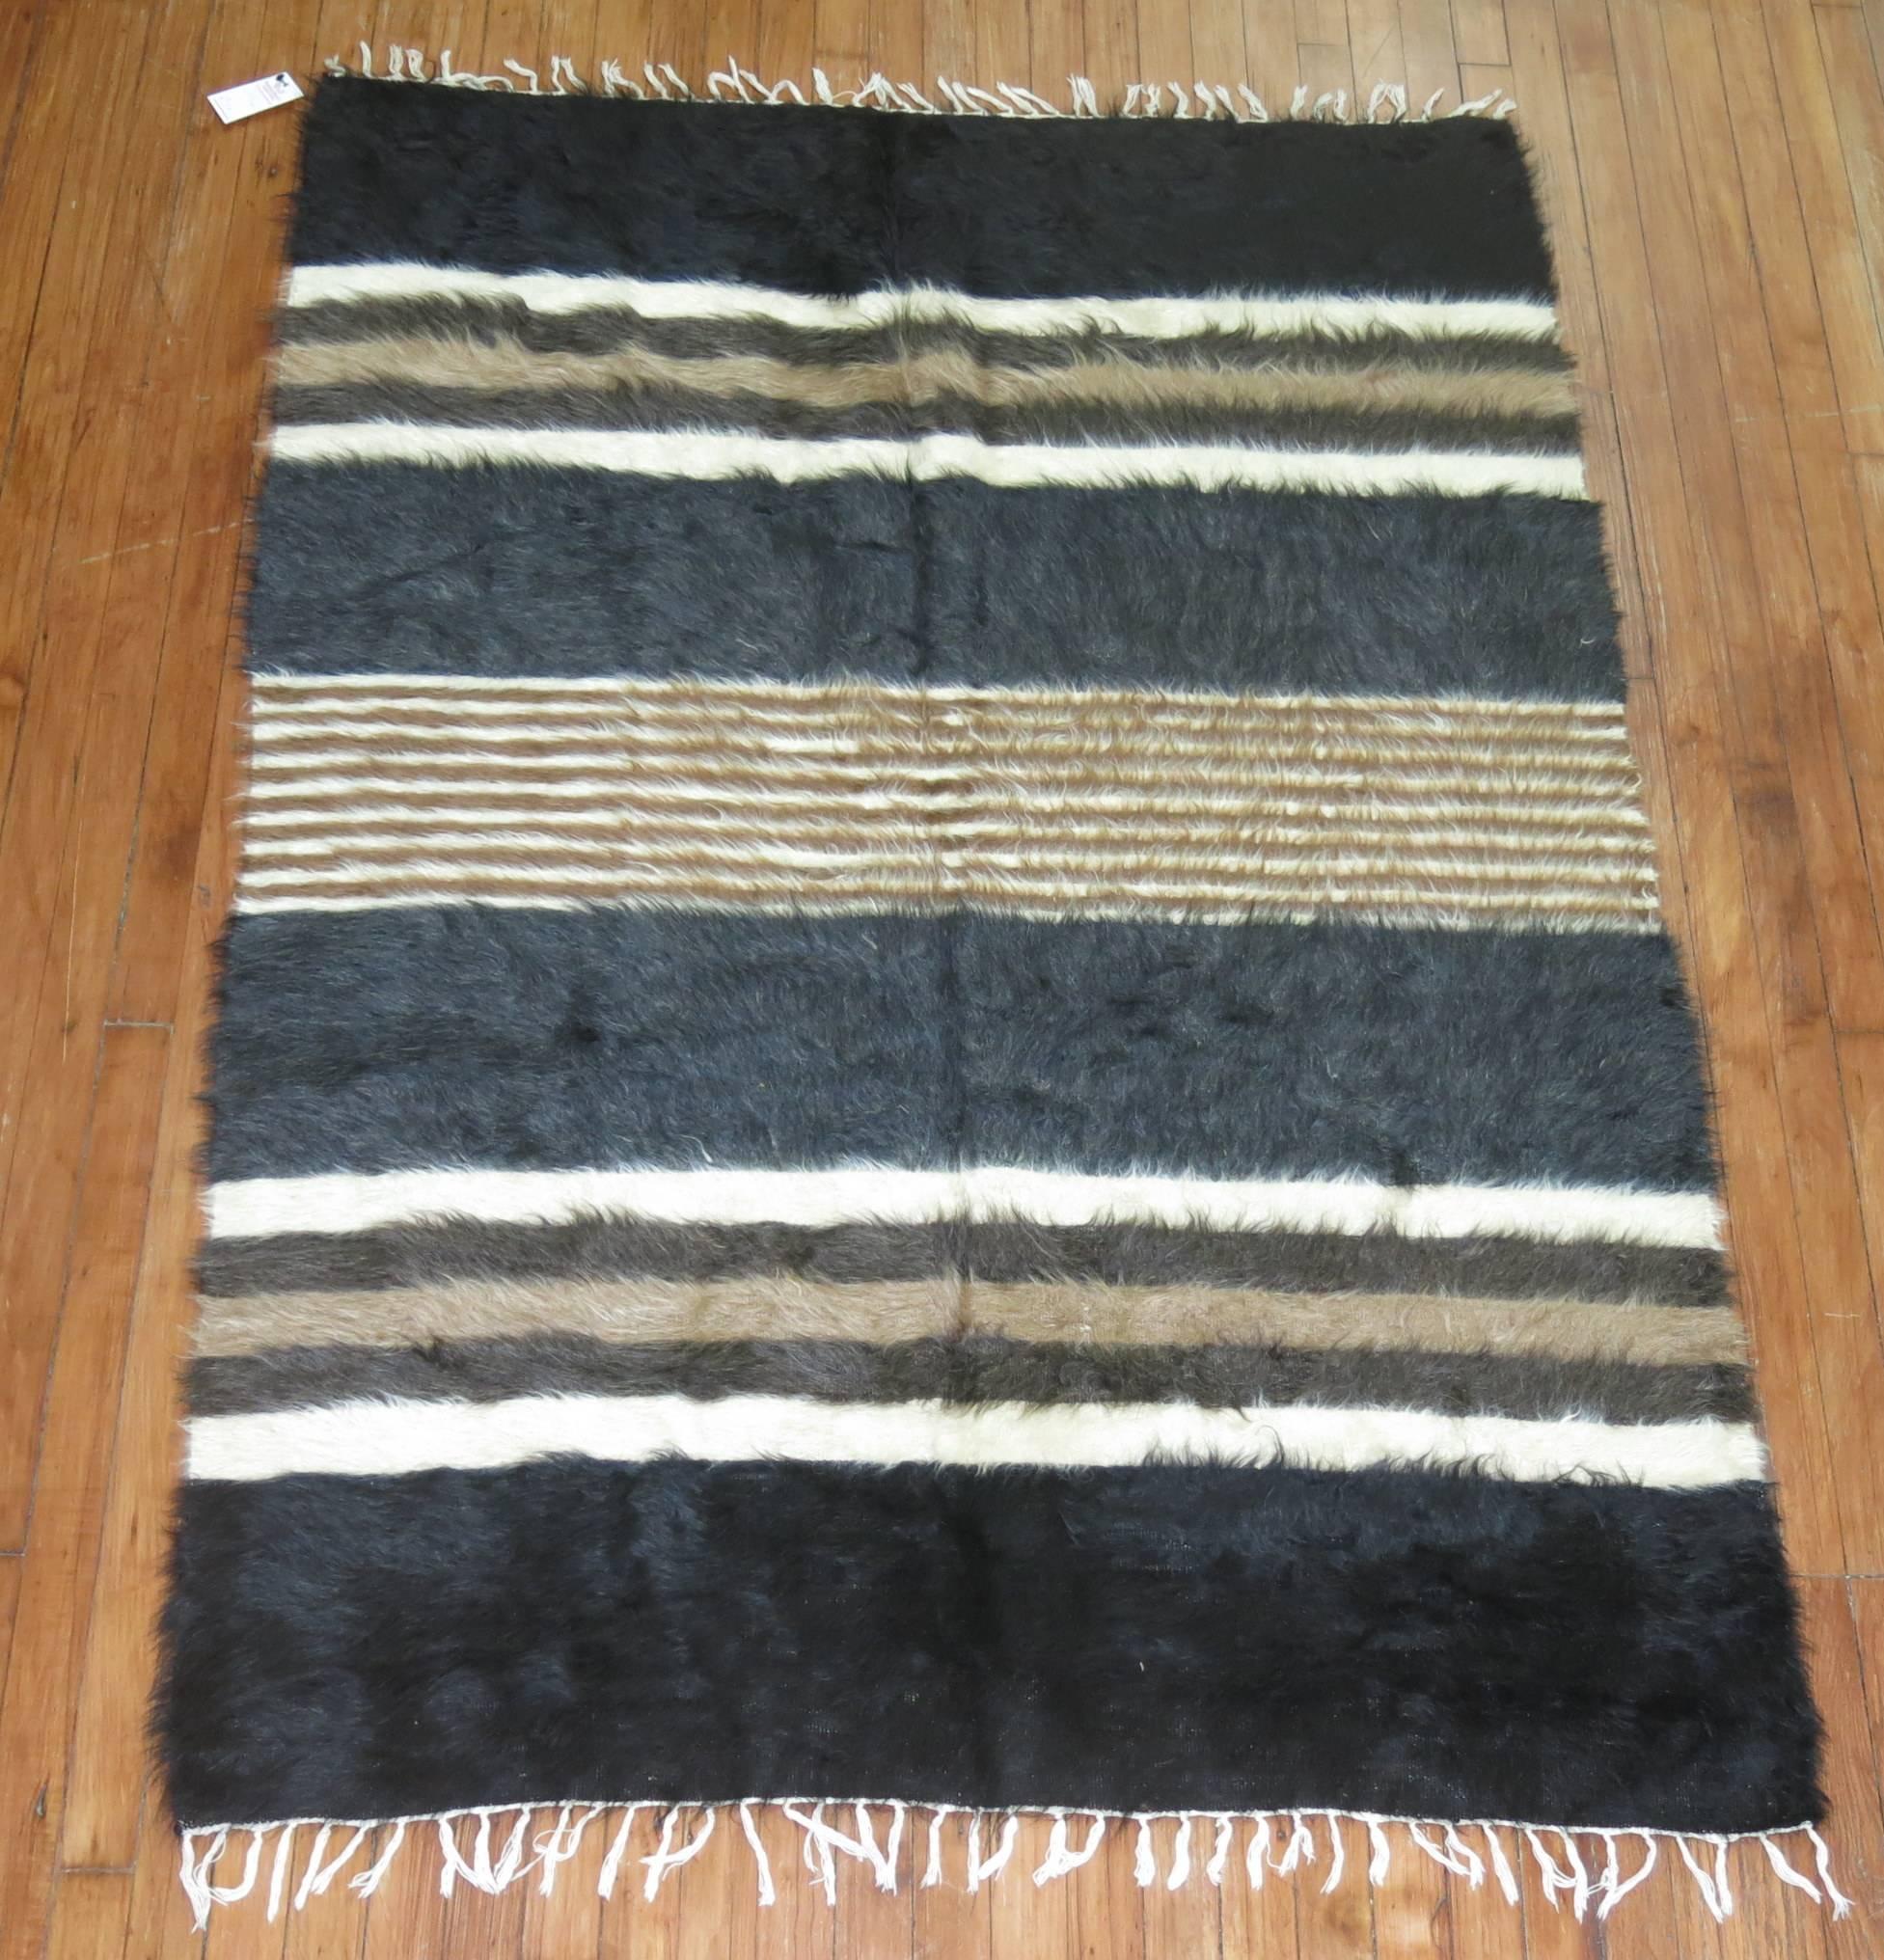 A vintage Turkish mohair rug in black, brown, gray and ivory accents with a Mid-Century Modern organic feel,

circa third quarter 20th century. Measures: 4'2